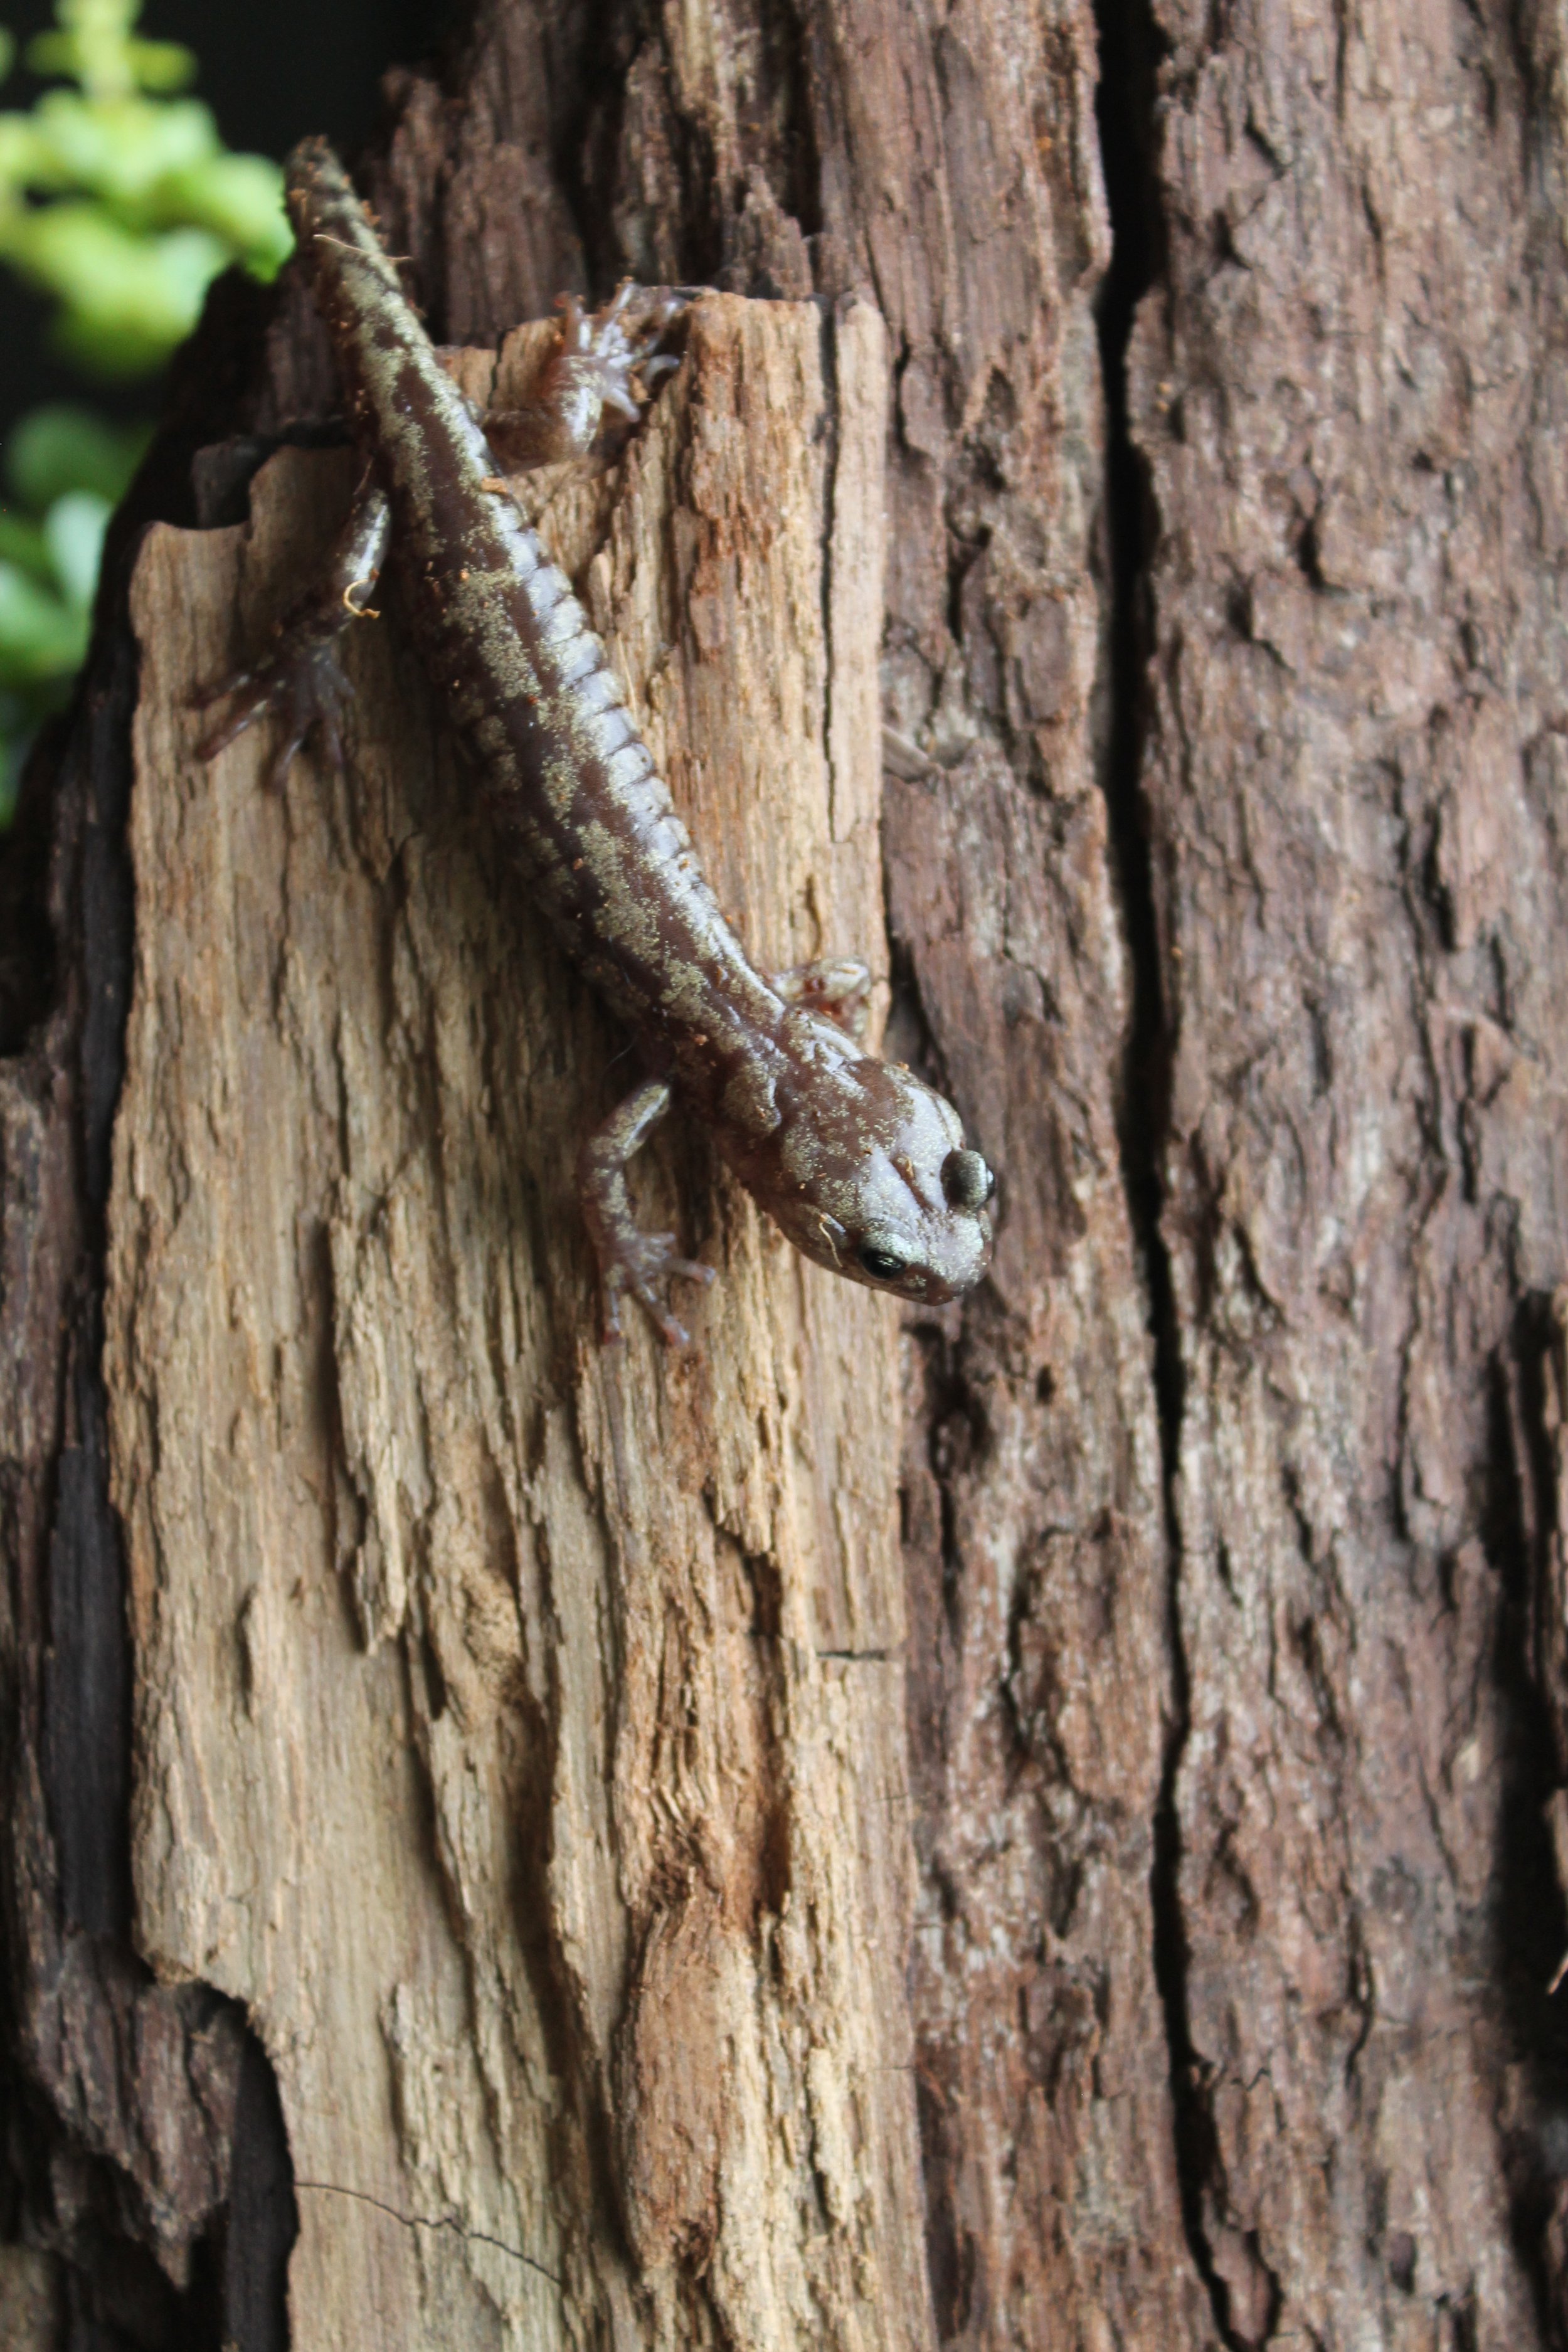 Salamander vertical, face down on a tree trunk